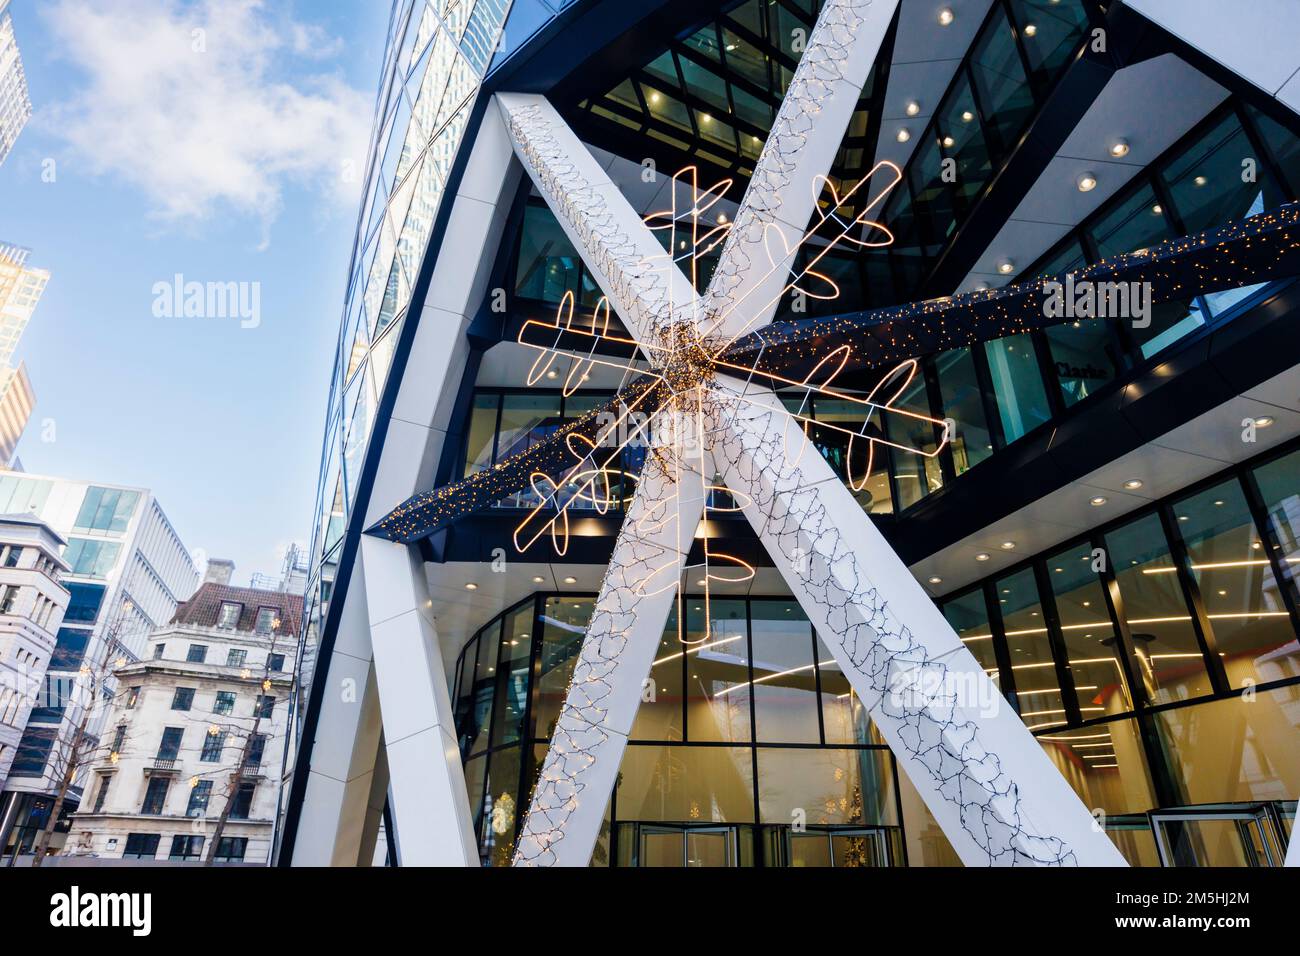 The exterior of the iconic Gherkin building in St Mary Axe in the City of London financial district, London, UK with Christmas decorative lights Stock Photo